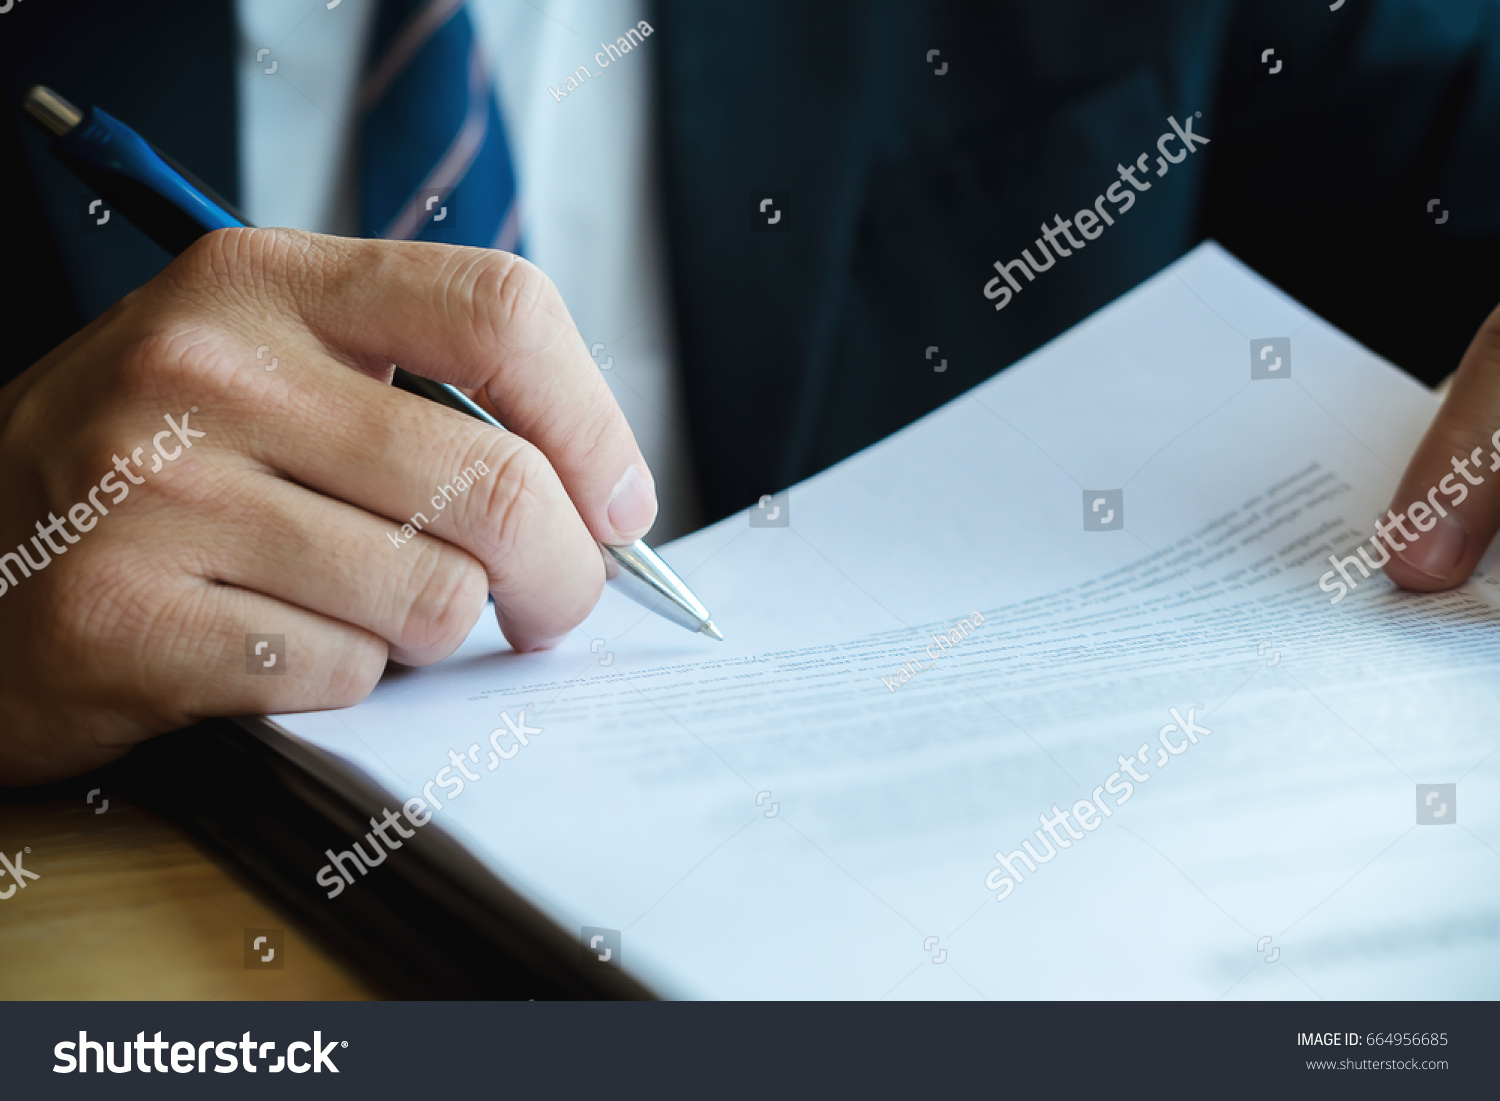 Close up business man reaching out sheet with contract agreement proposing to sign.Full and accurate details, individual who owns the business sign personally,director of the company, solicitor. #664956685